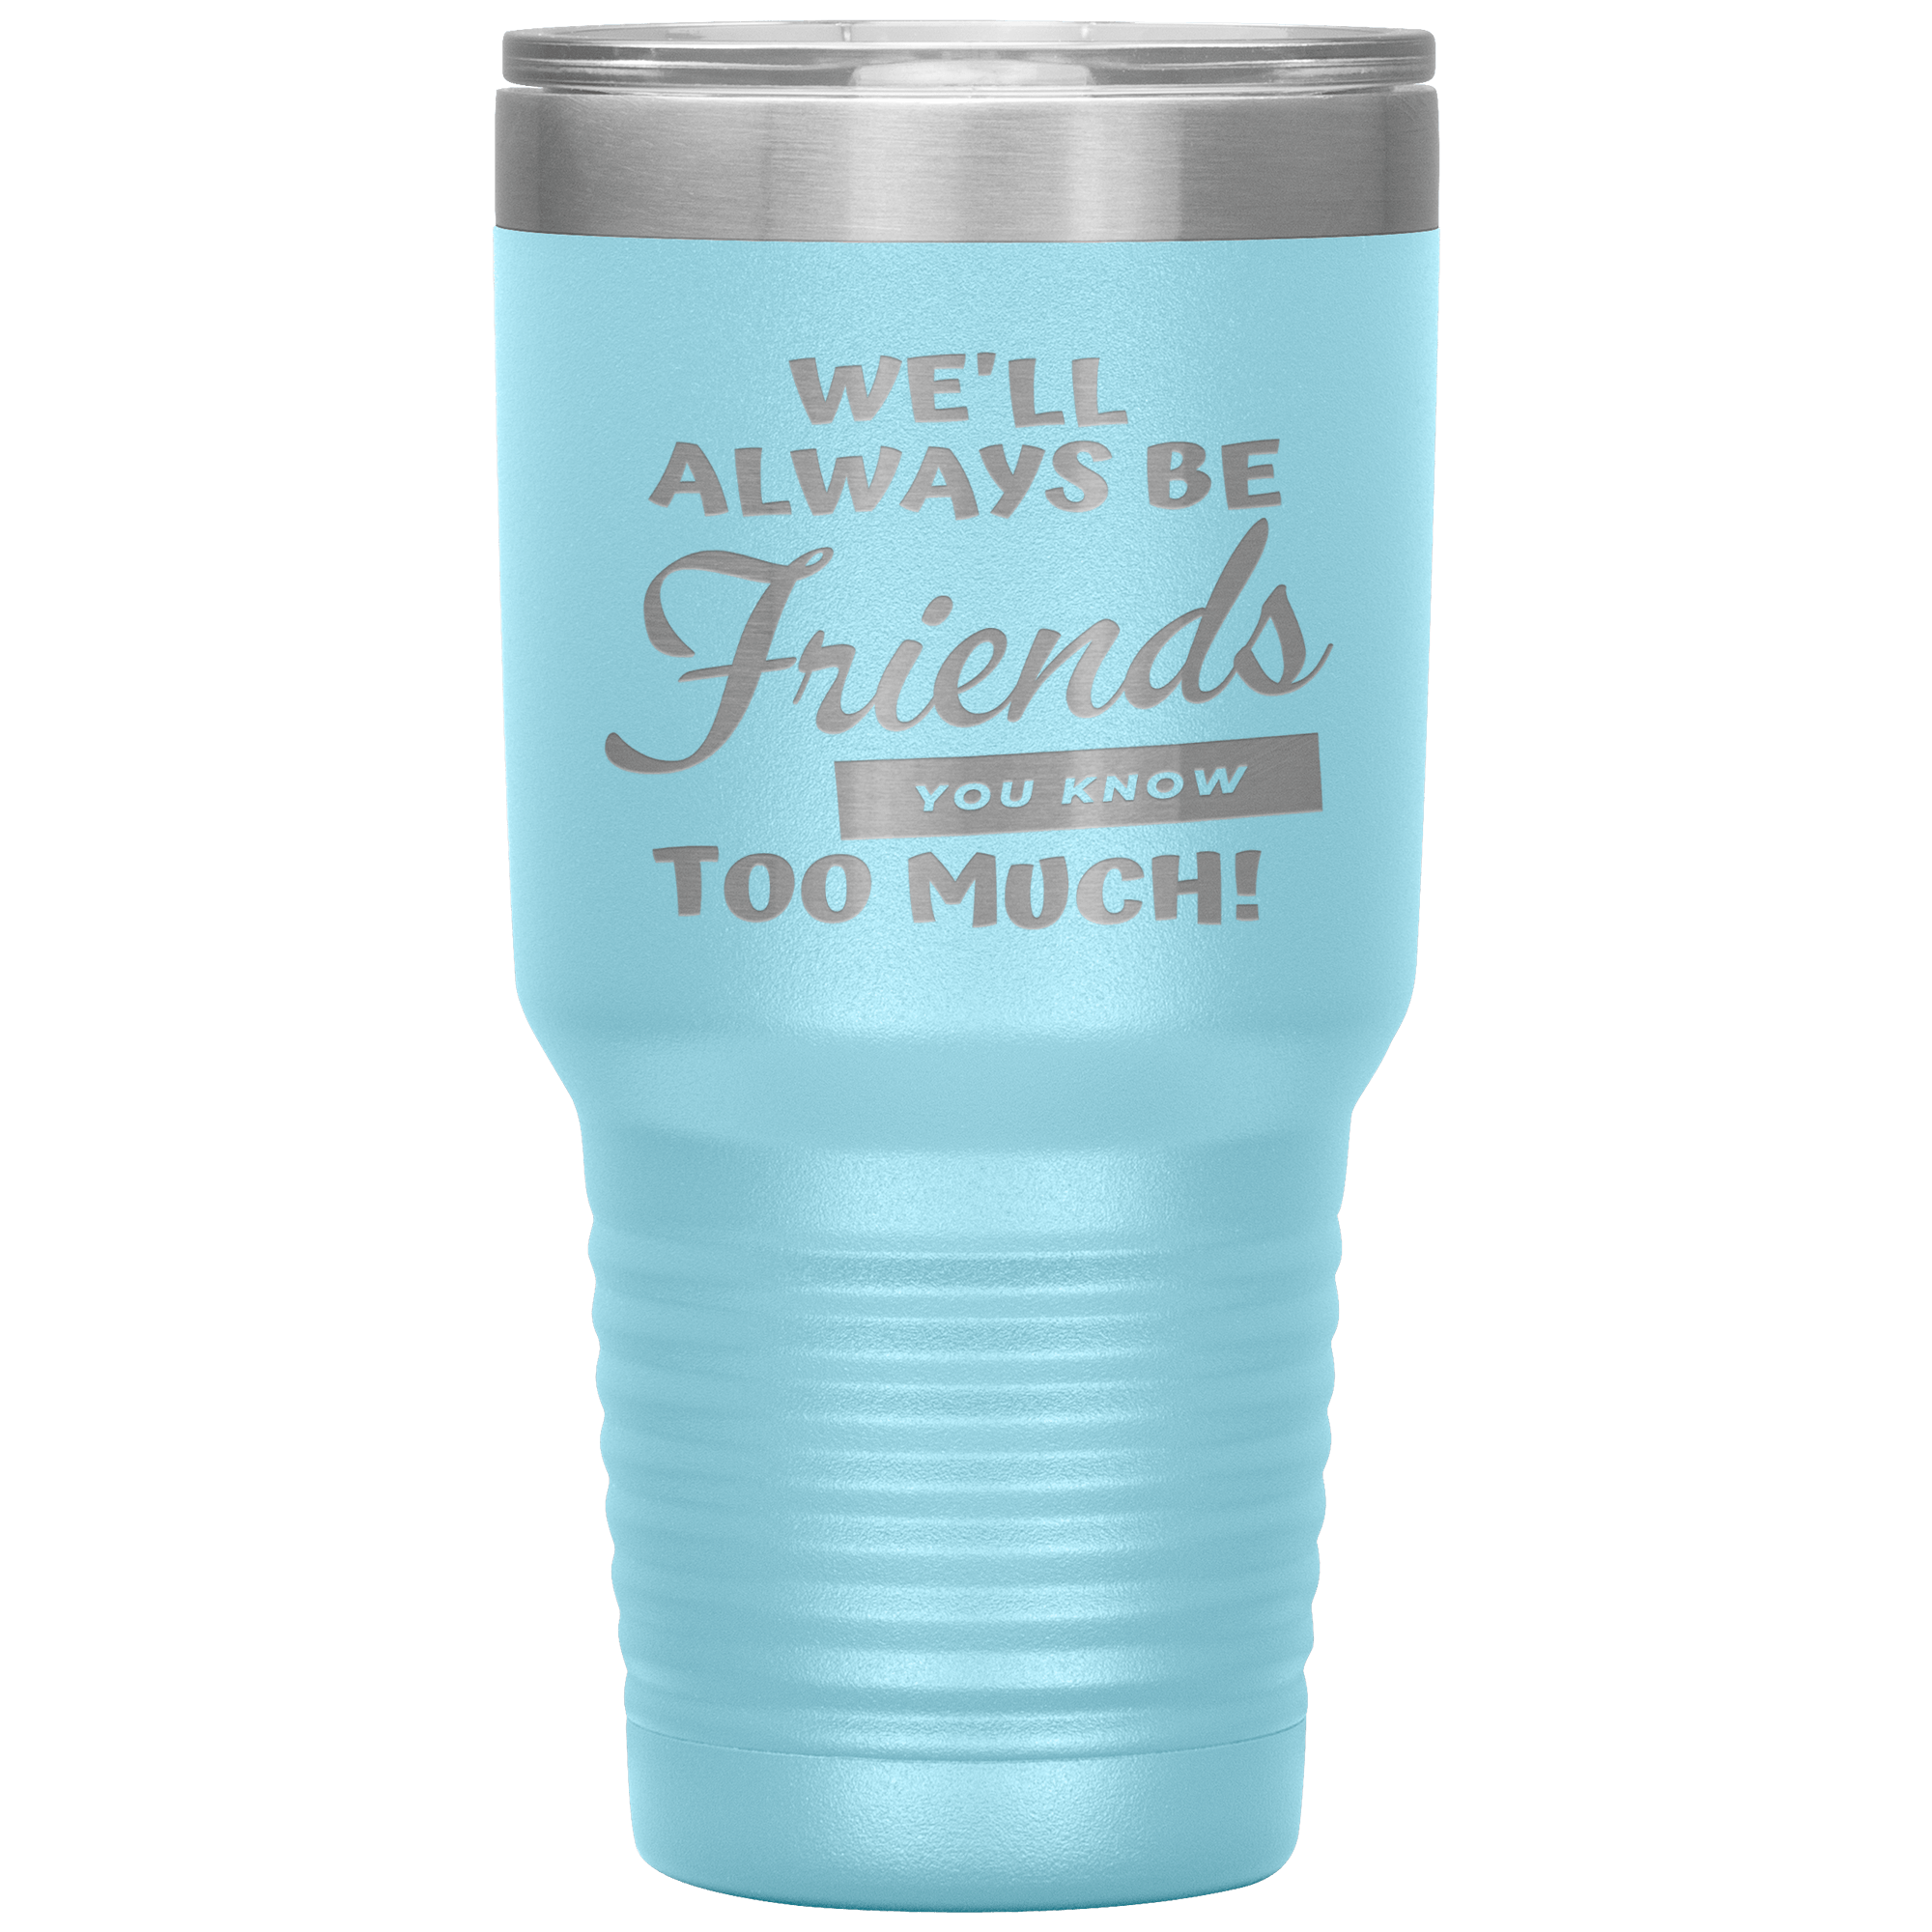 "WE'LL ALWAYS BE FRIENDS YOU KNOW TOO MUCH" TUMBLER